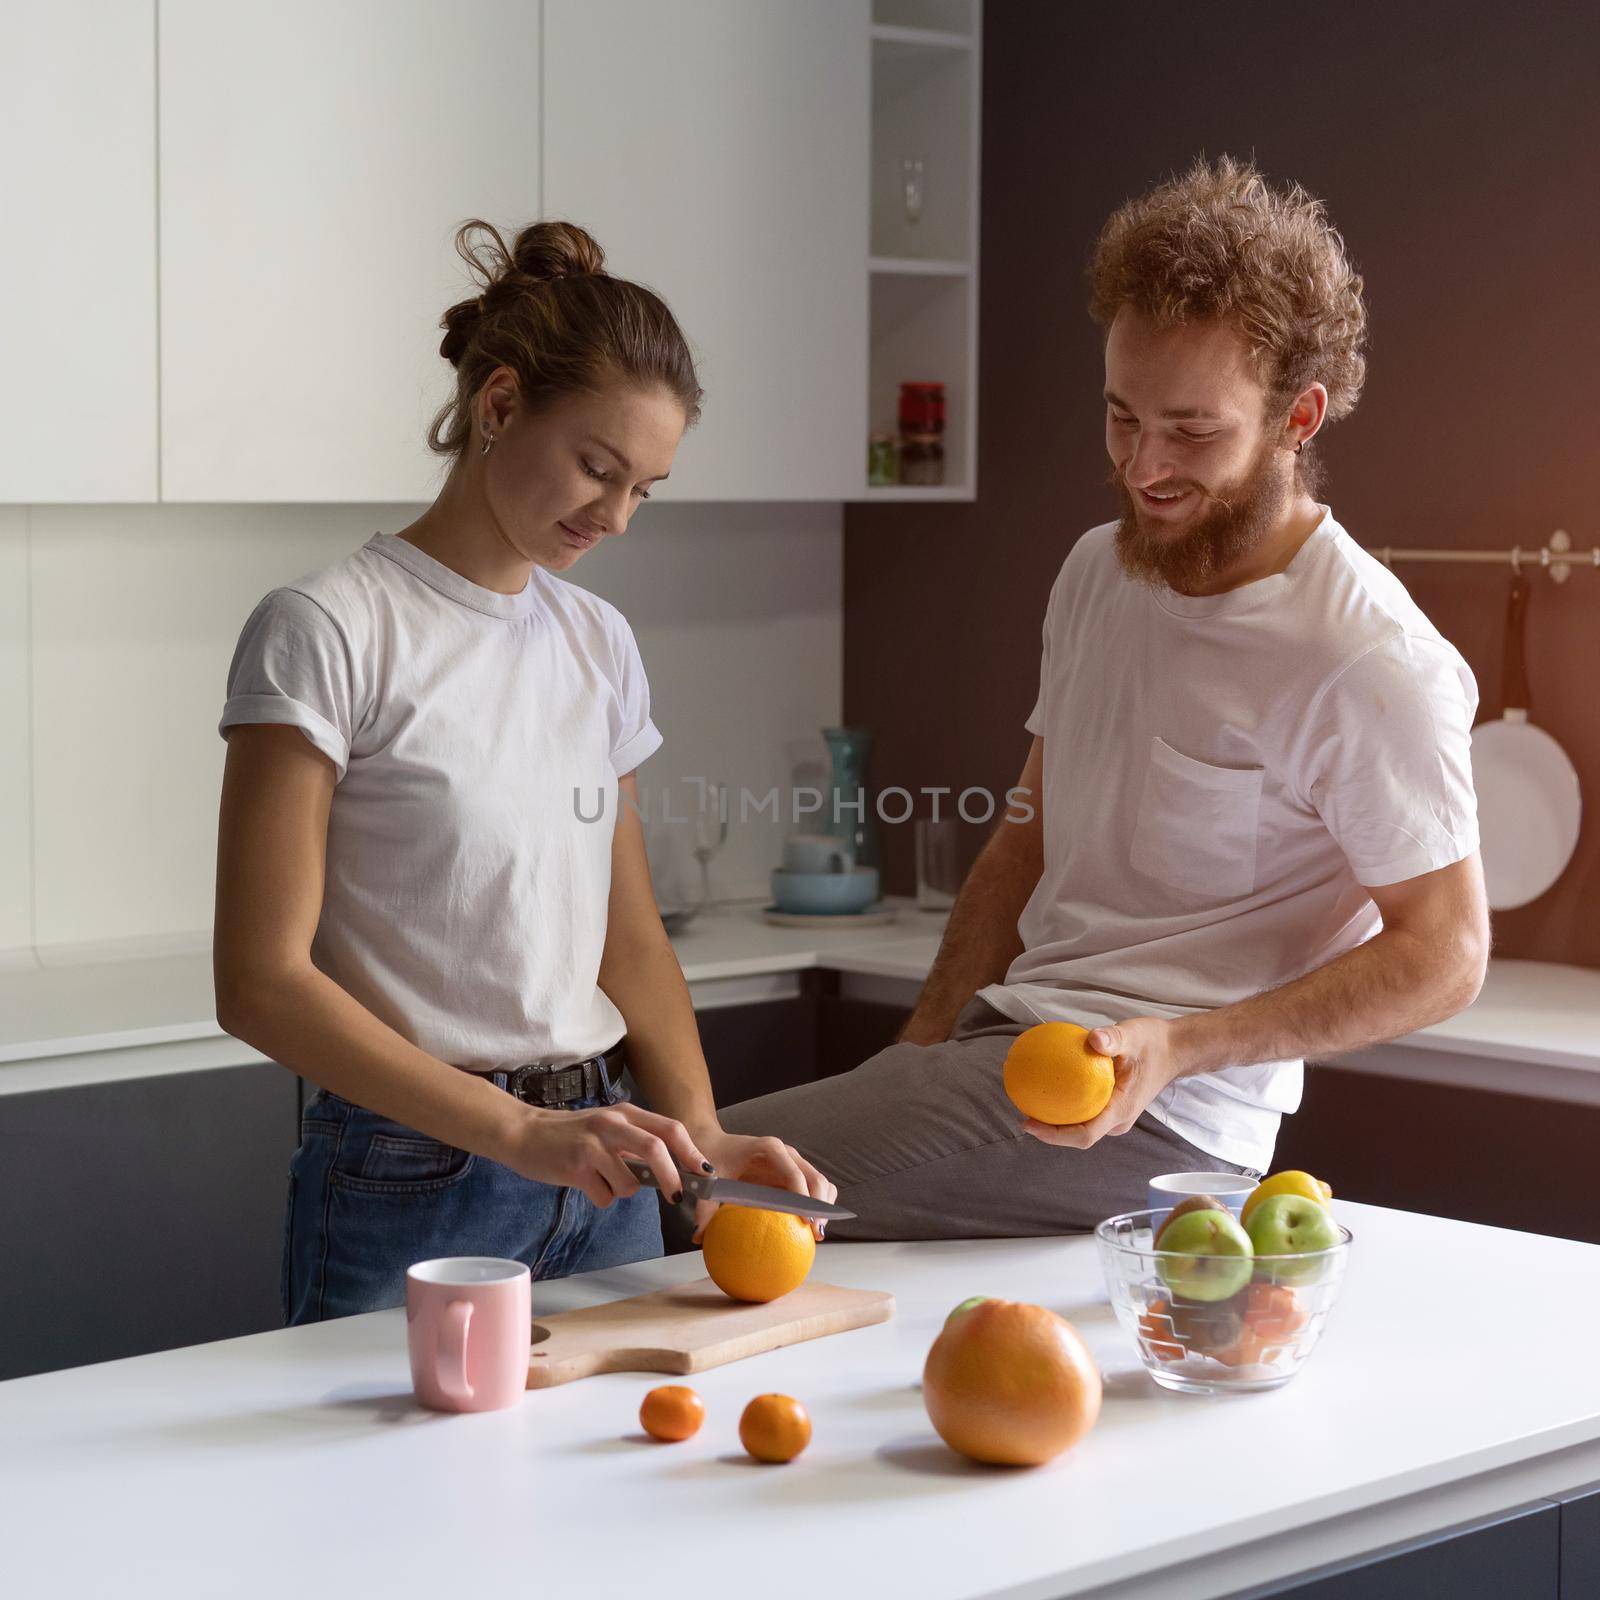 Couple making fun cooking together at modern kitchen in a new house. Beautiful young couple happy of their new home. Pretty girl feeds or nursing her boyfriend. New house concept. Square cropped.